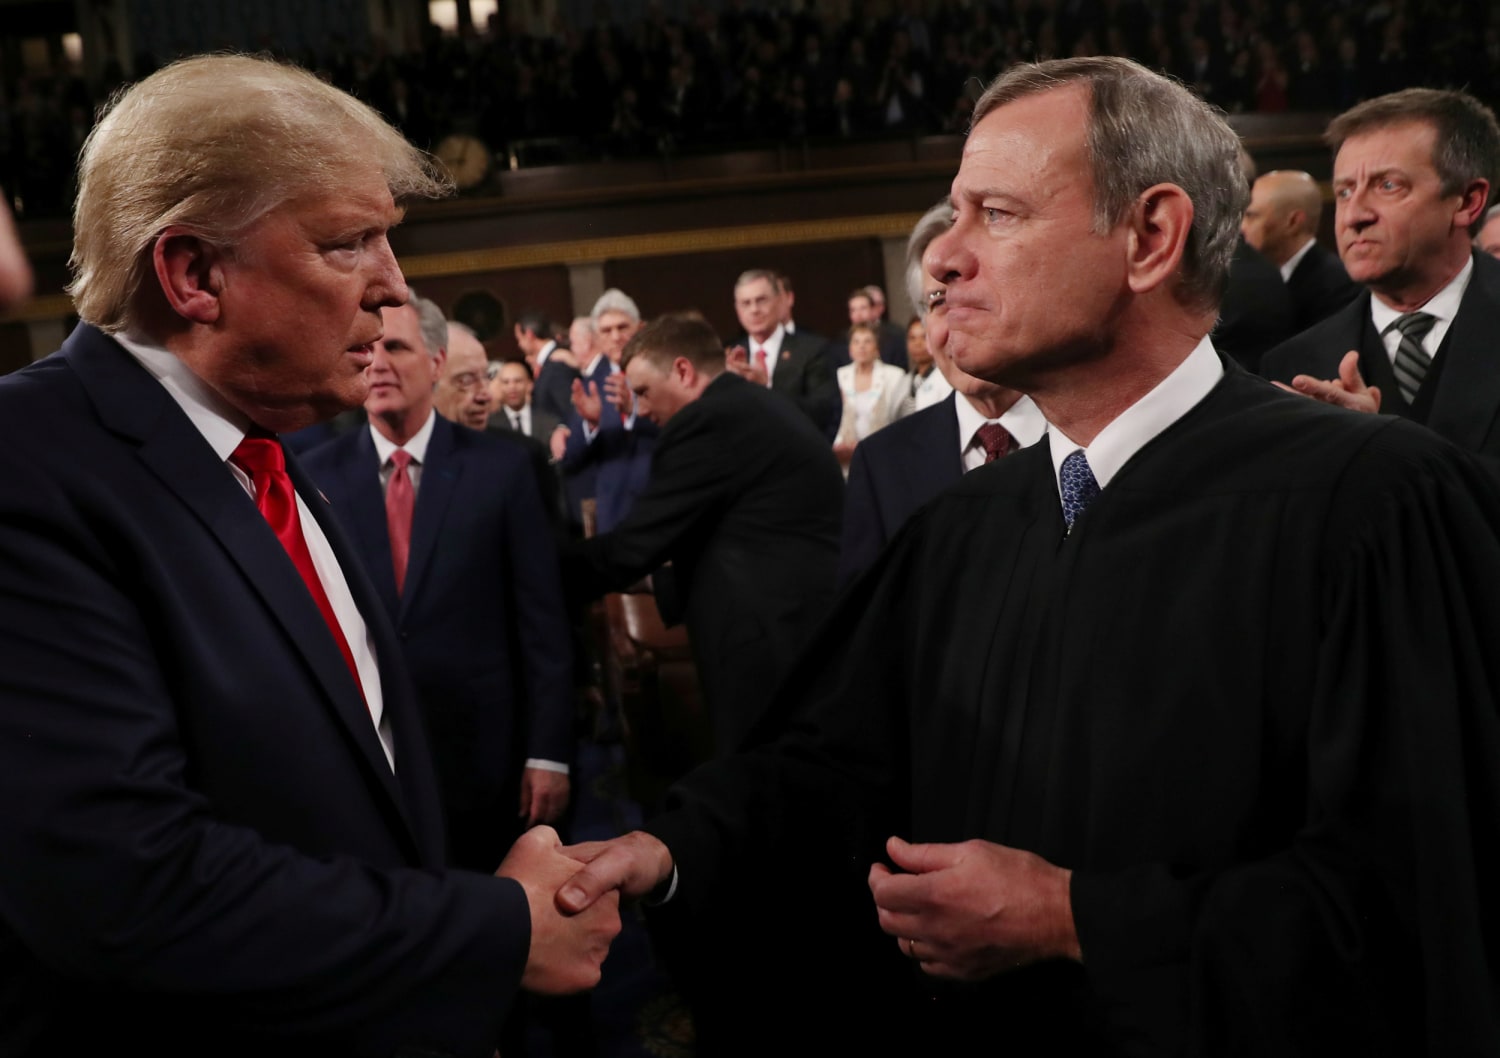 The Supreme Court rejects Trump again. This time, it's personal.